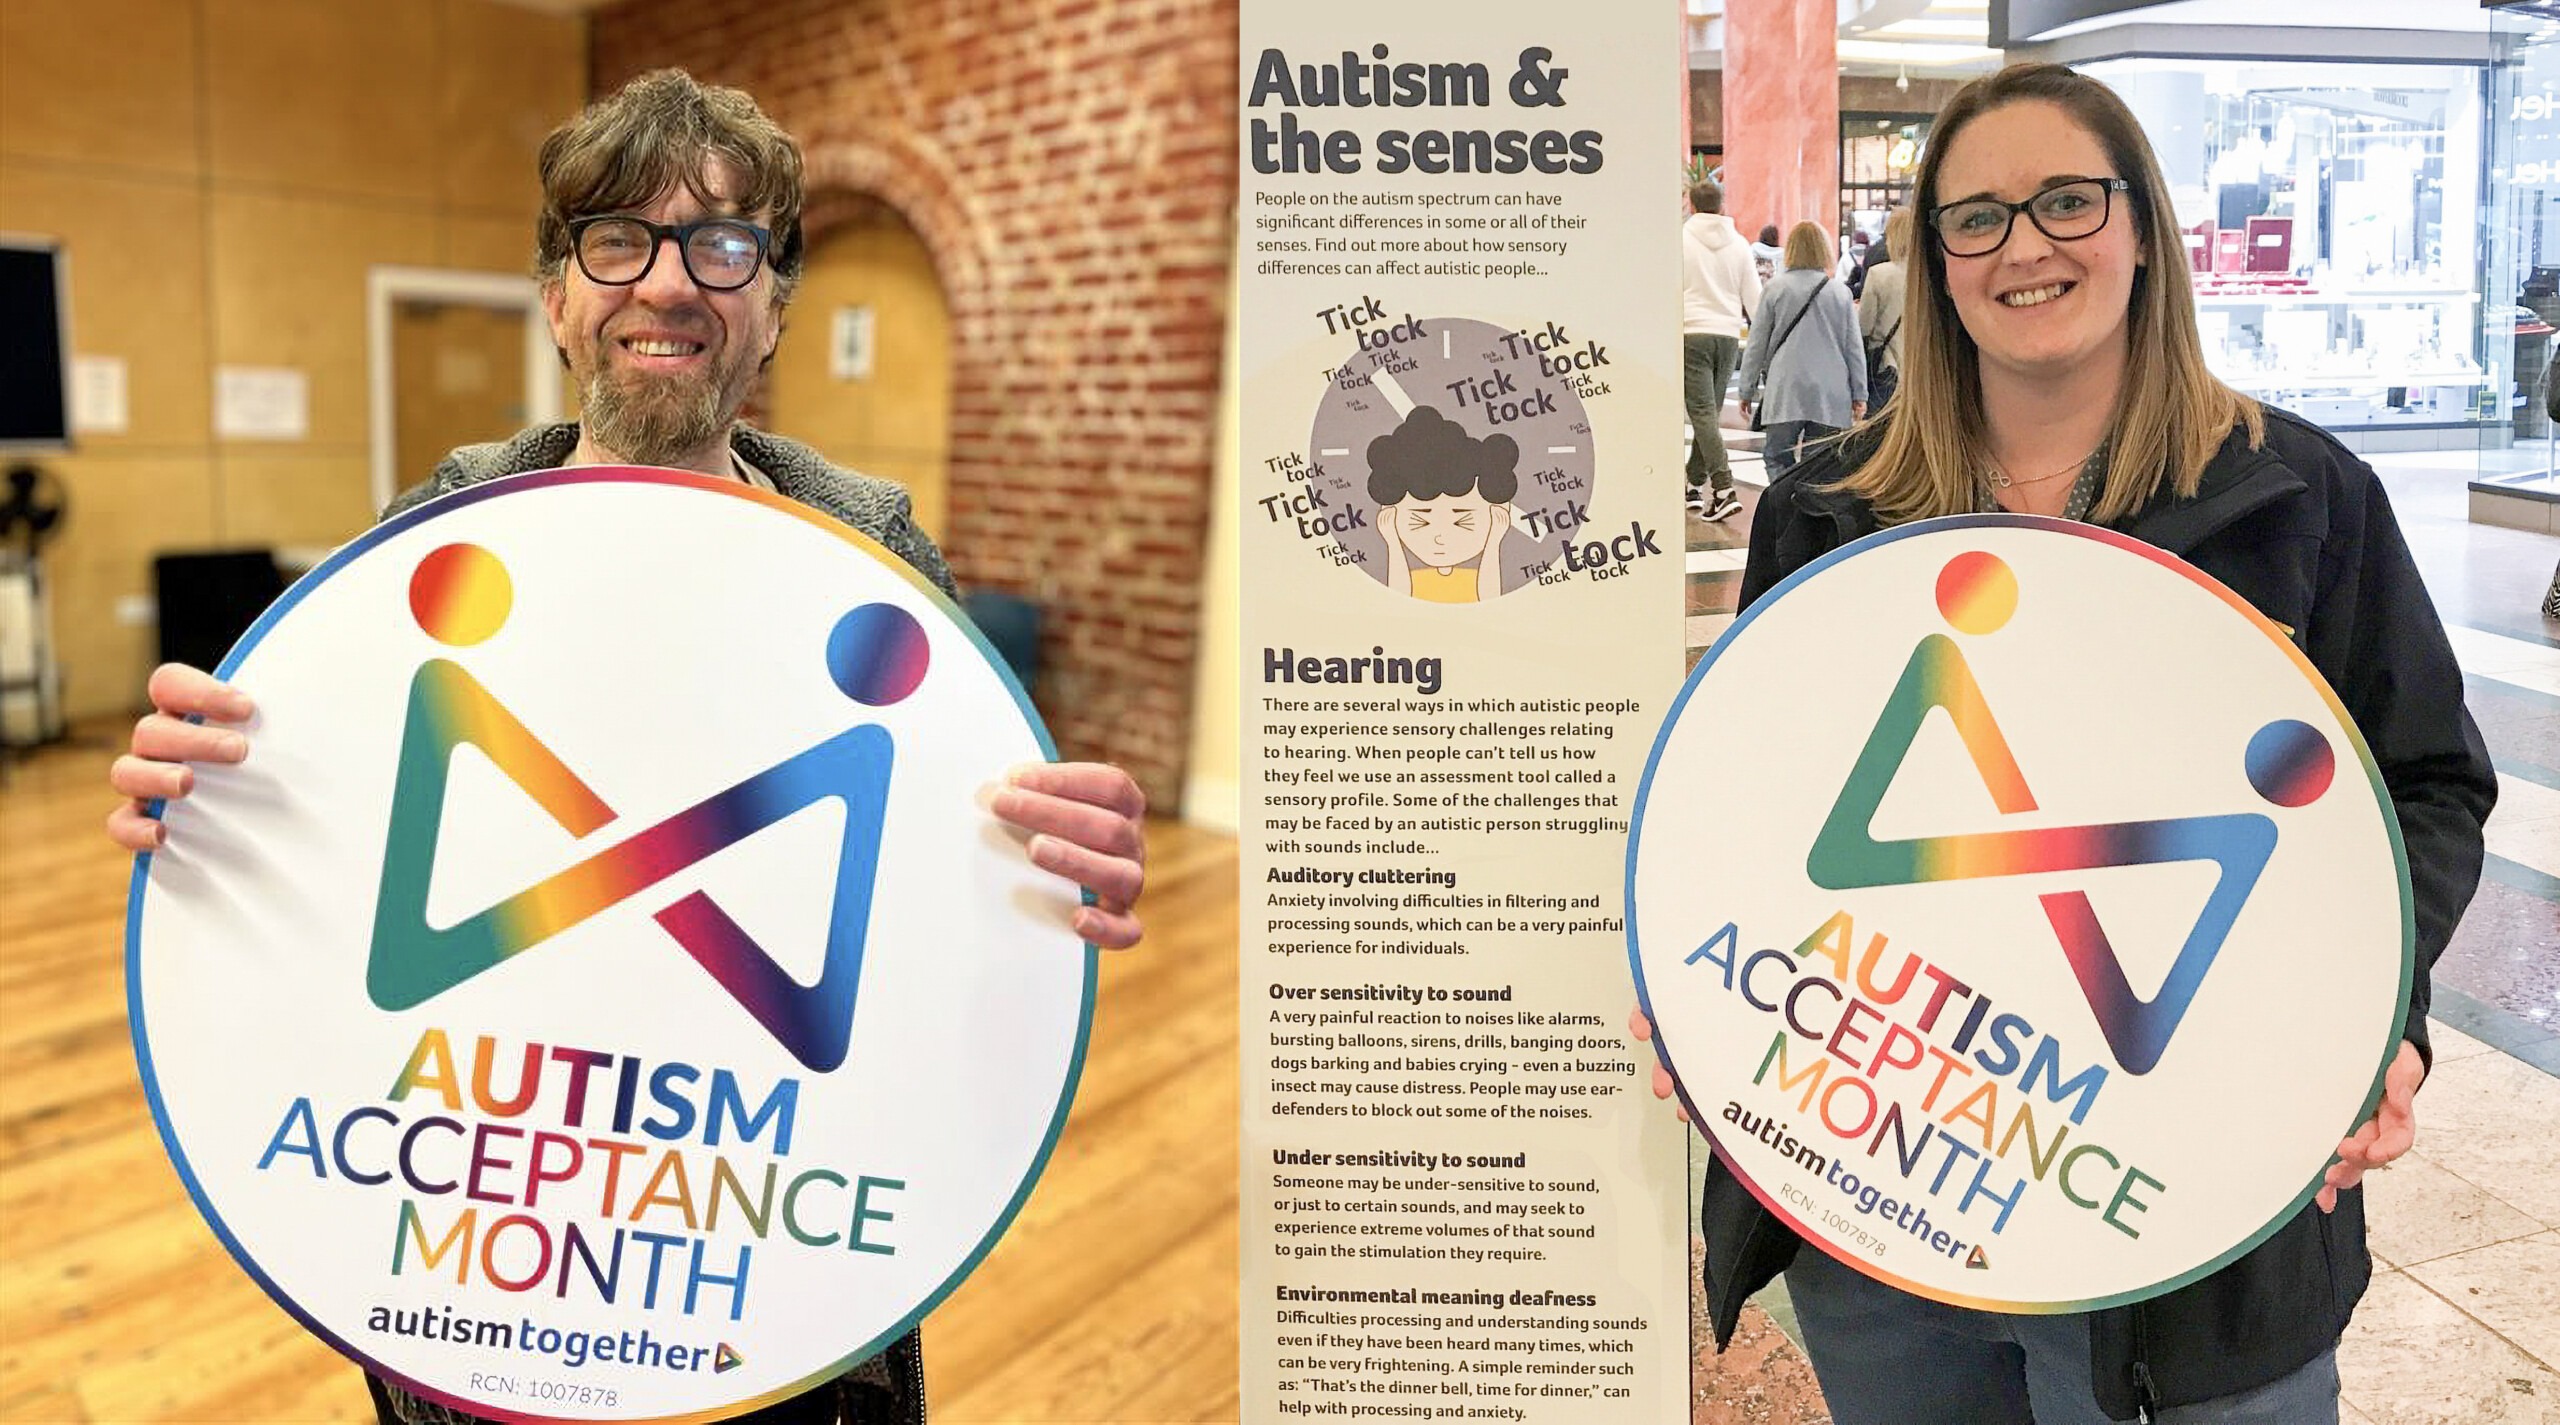 Grant (left), one of the people Autism Together supports is standing and holding an Autism Acceptance Month sign. To the right, Chloe Jones, Fundraising Officer at Autism Together, is also standing and holding the same sign. She is pictured next to a display about how autism can affect the senses, in this case - hearing.